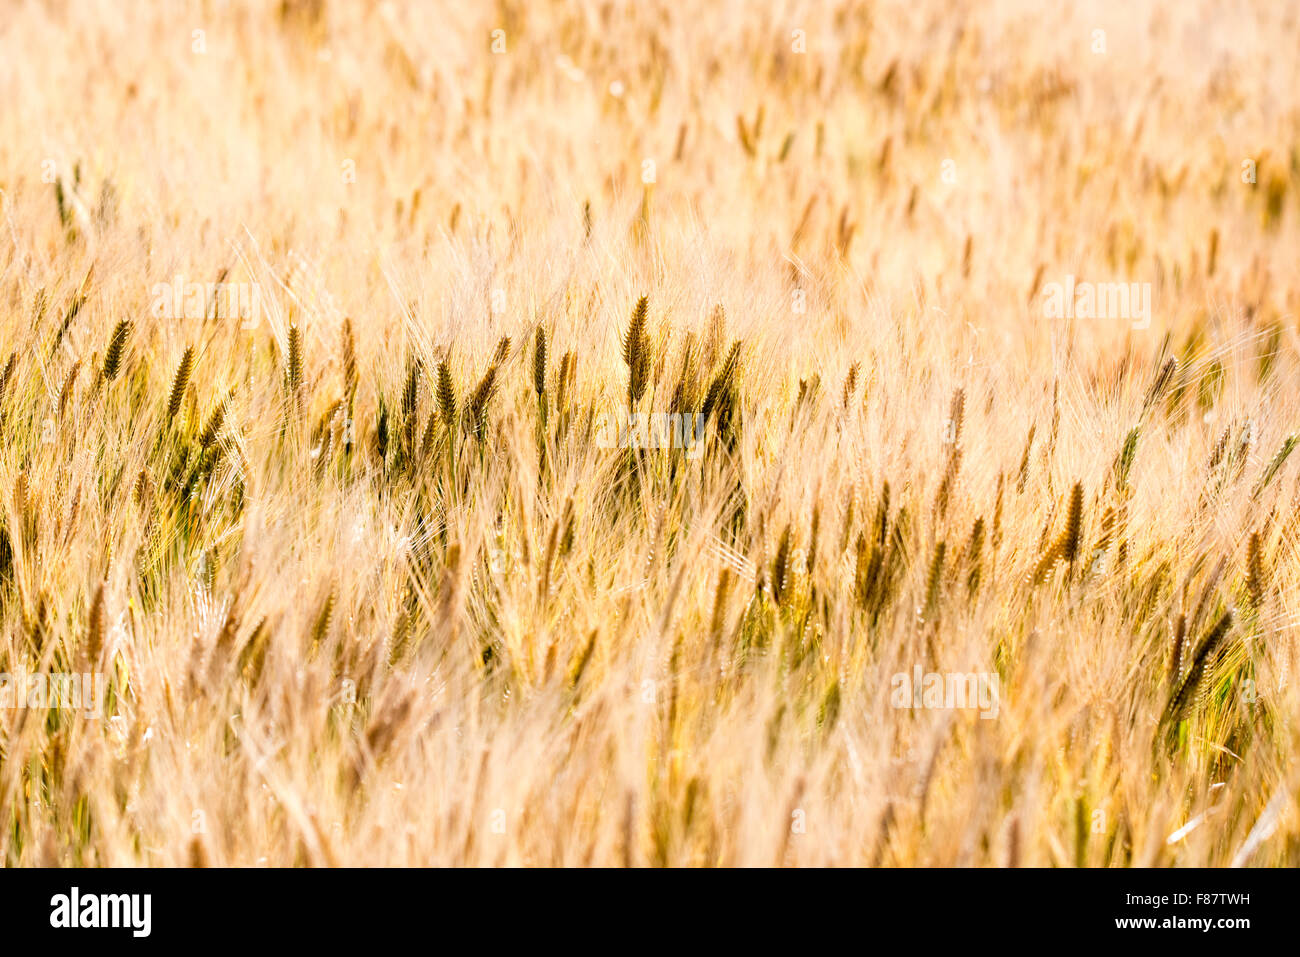 A wheat field in the Jemma Valley, Ethiopia Stock Photo